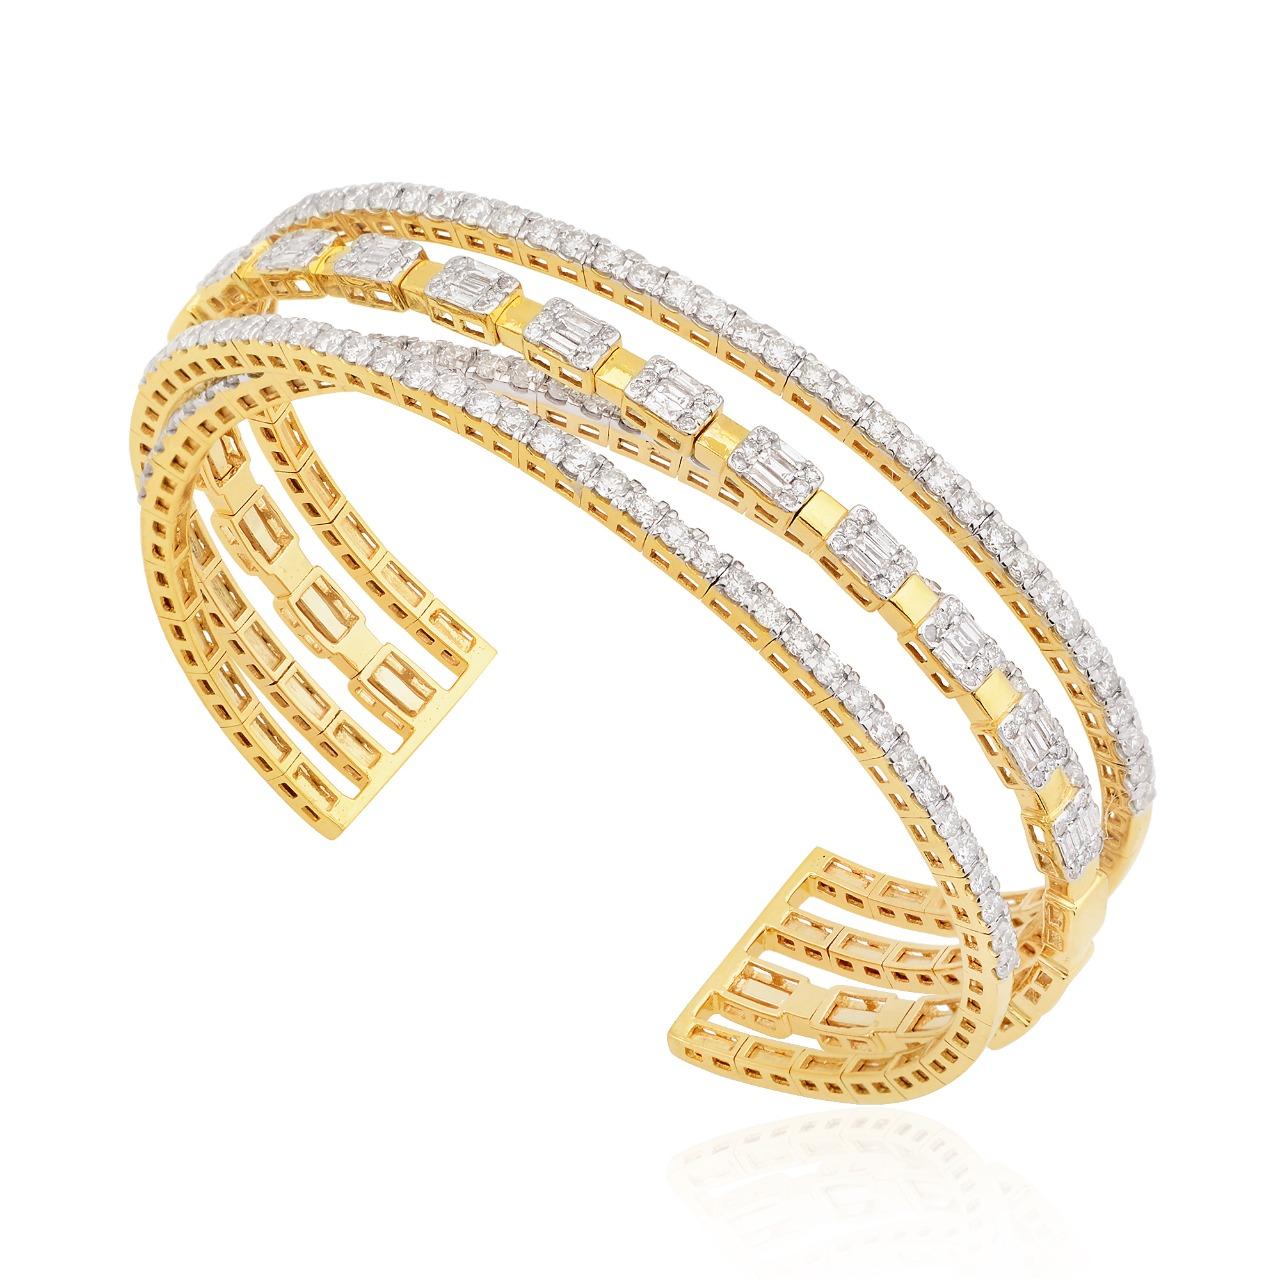 Cast from 14-karat yellow gold, this link bracelet is hand set with 5.30 carats of sparkling diamonds. Available in yellow, rose and white gold. 

FOLLOW MEGHNA JEWELS storefront to view the latest collection & exclusive pieces. Meghna Jewels is